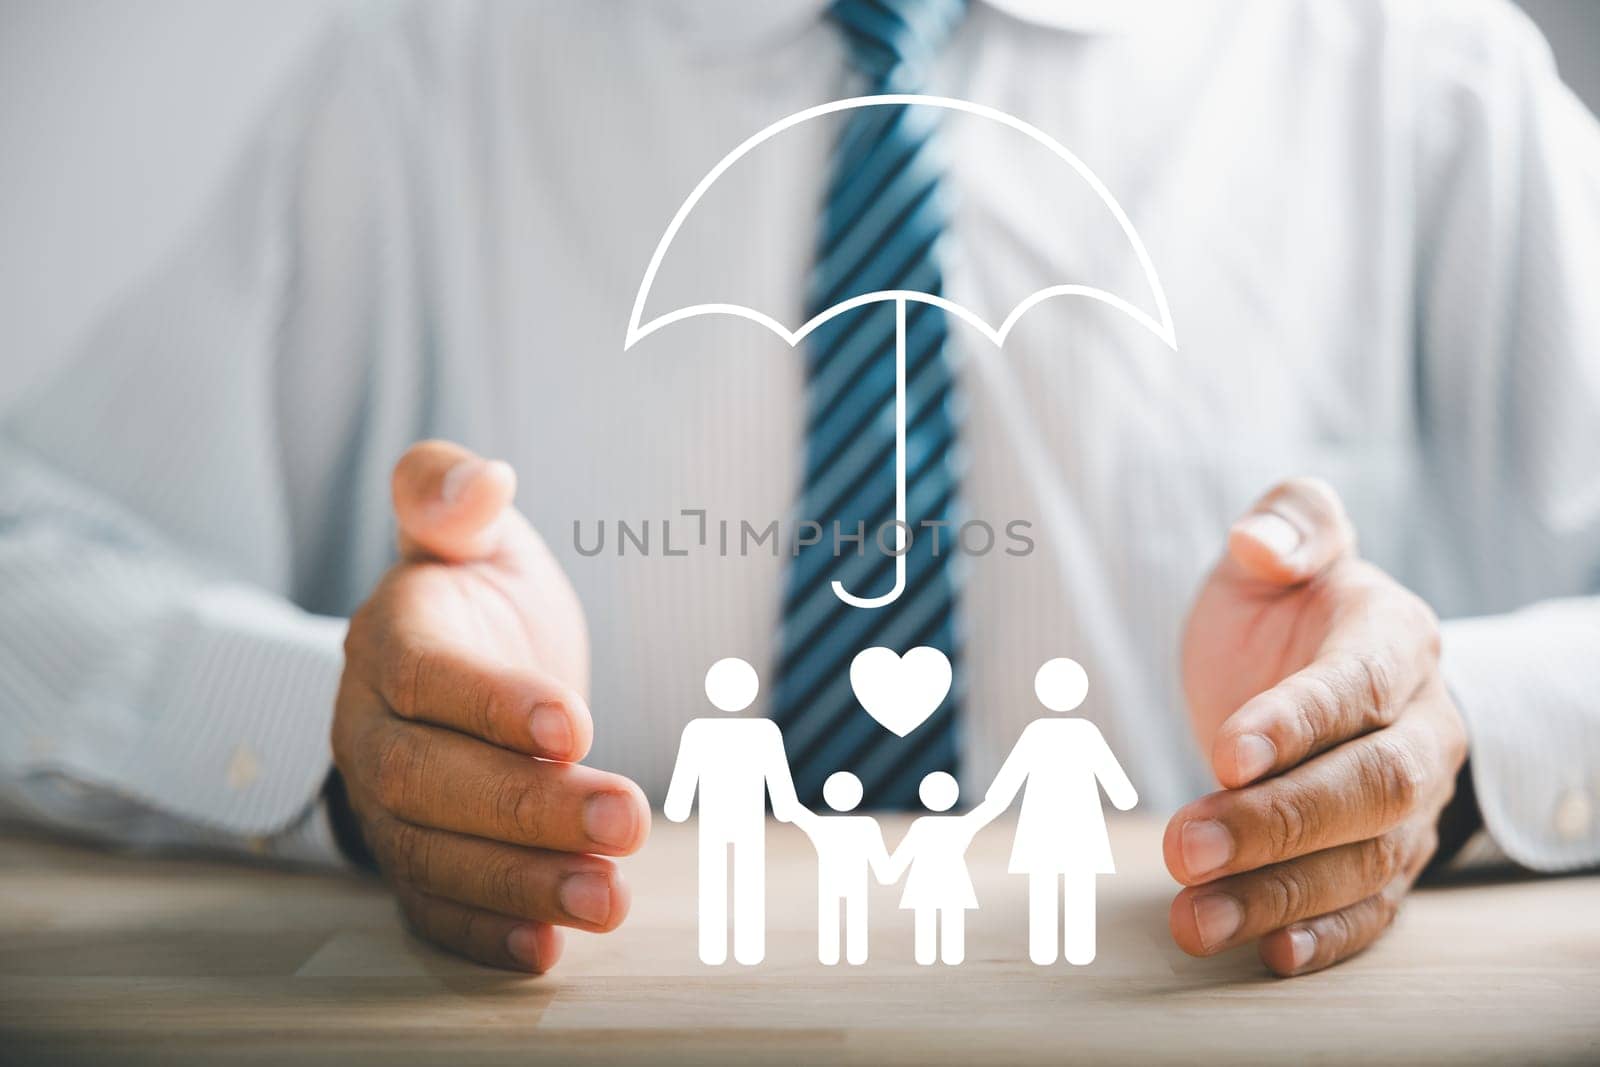 Insurance concepts, a businessman protective gesture beside a silhouette of a young family. Icons for family, life, health, and house insurance. Depicting family life insurance and policy assurance.